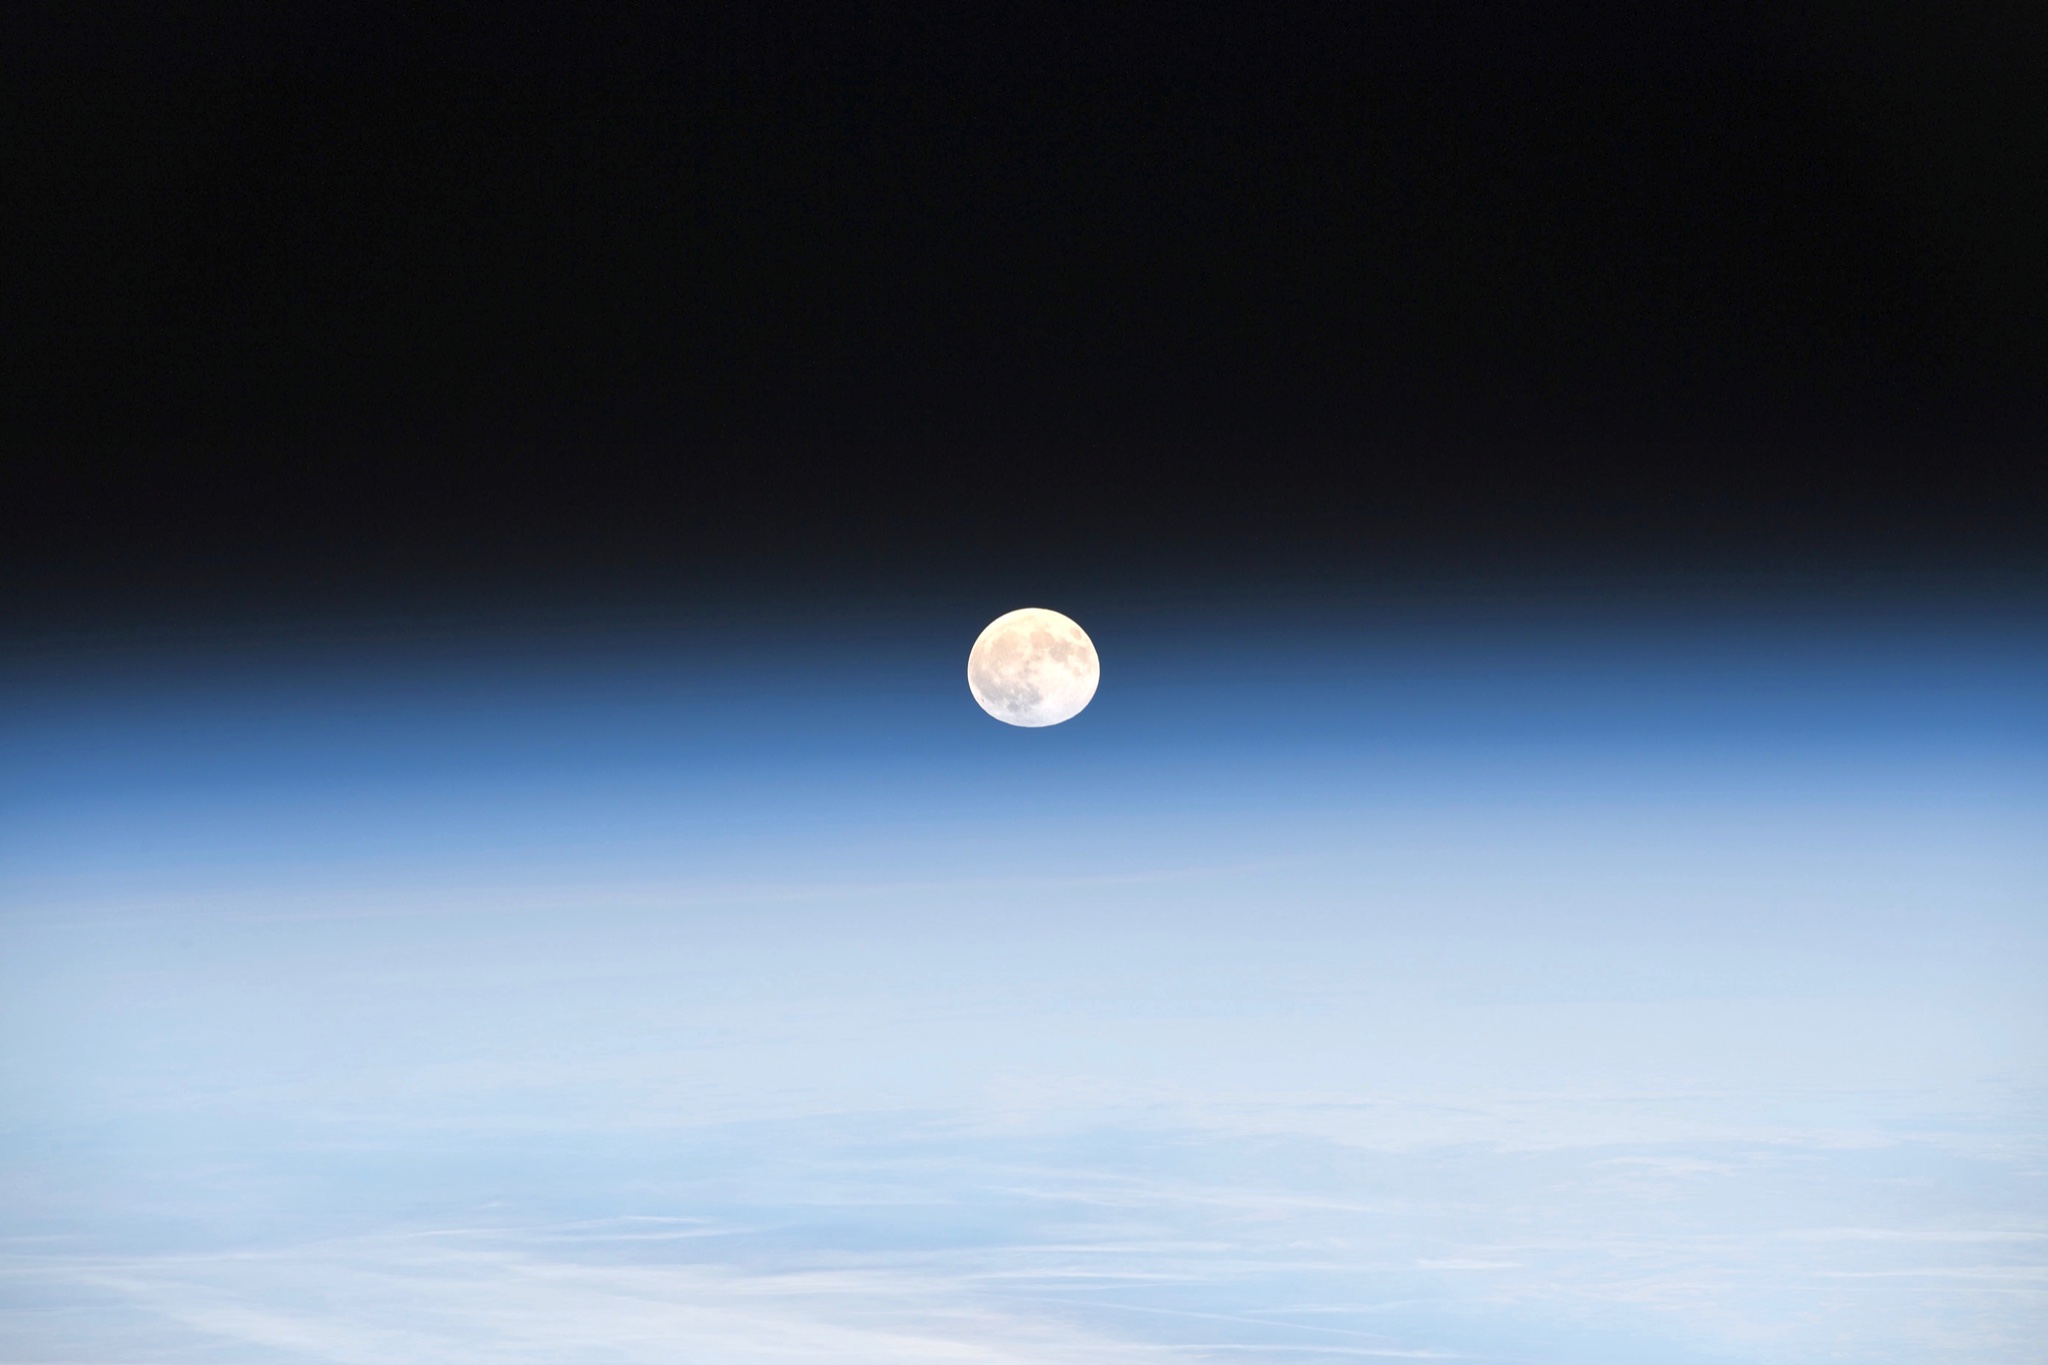 astronaut captures stunning moonrise from space station 4